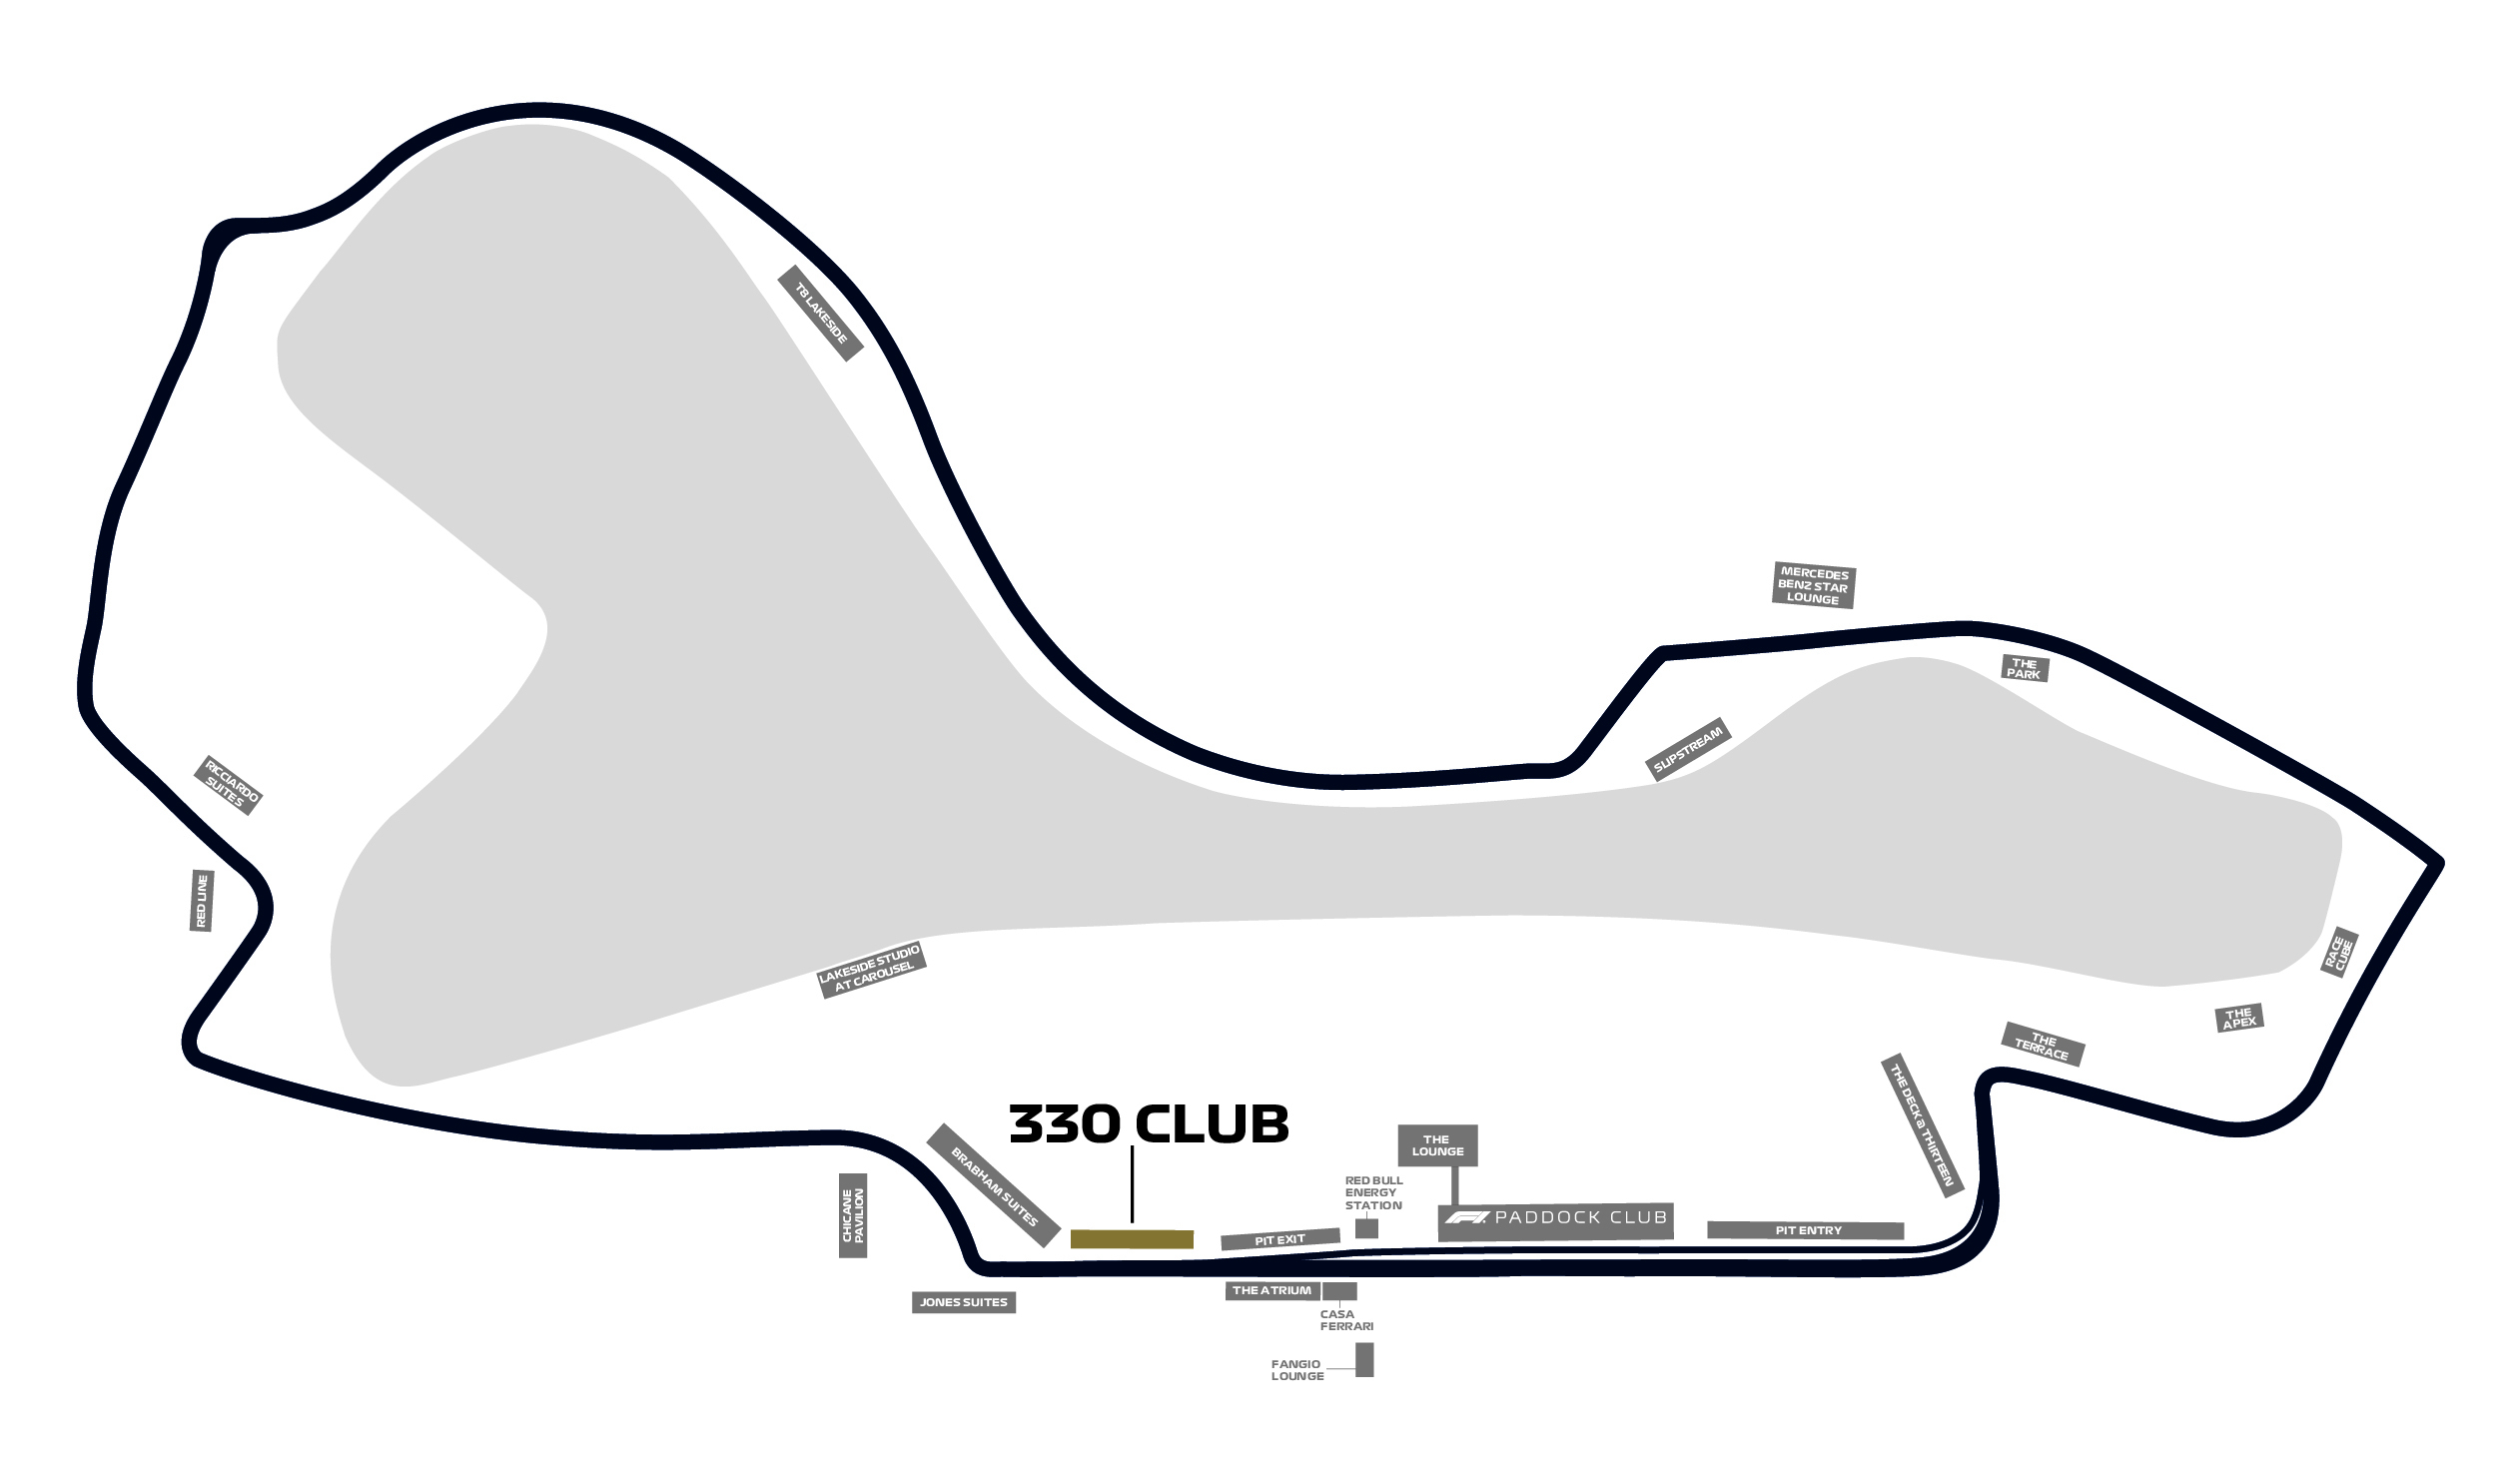 Map of 330 Club